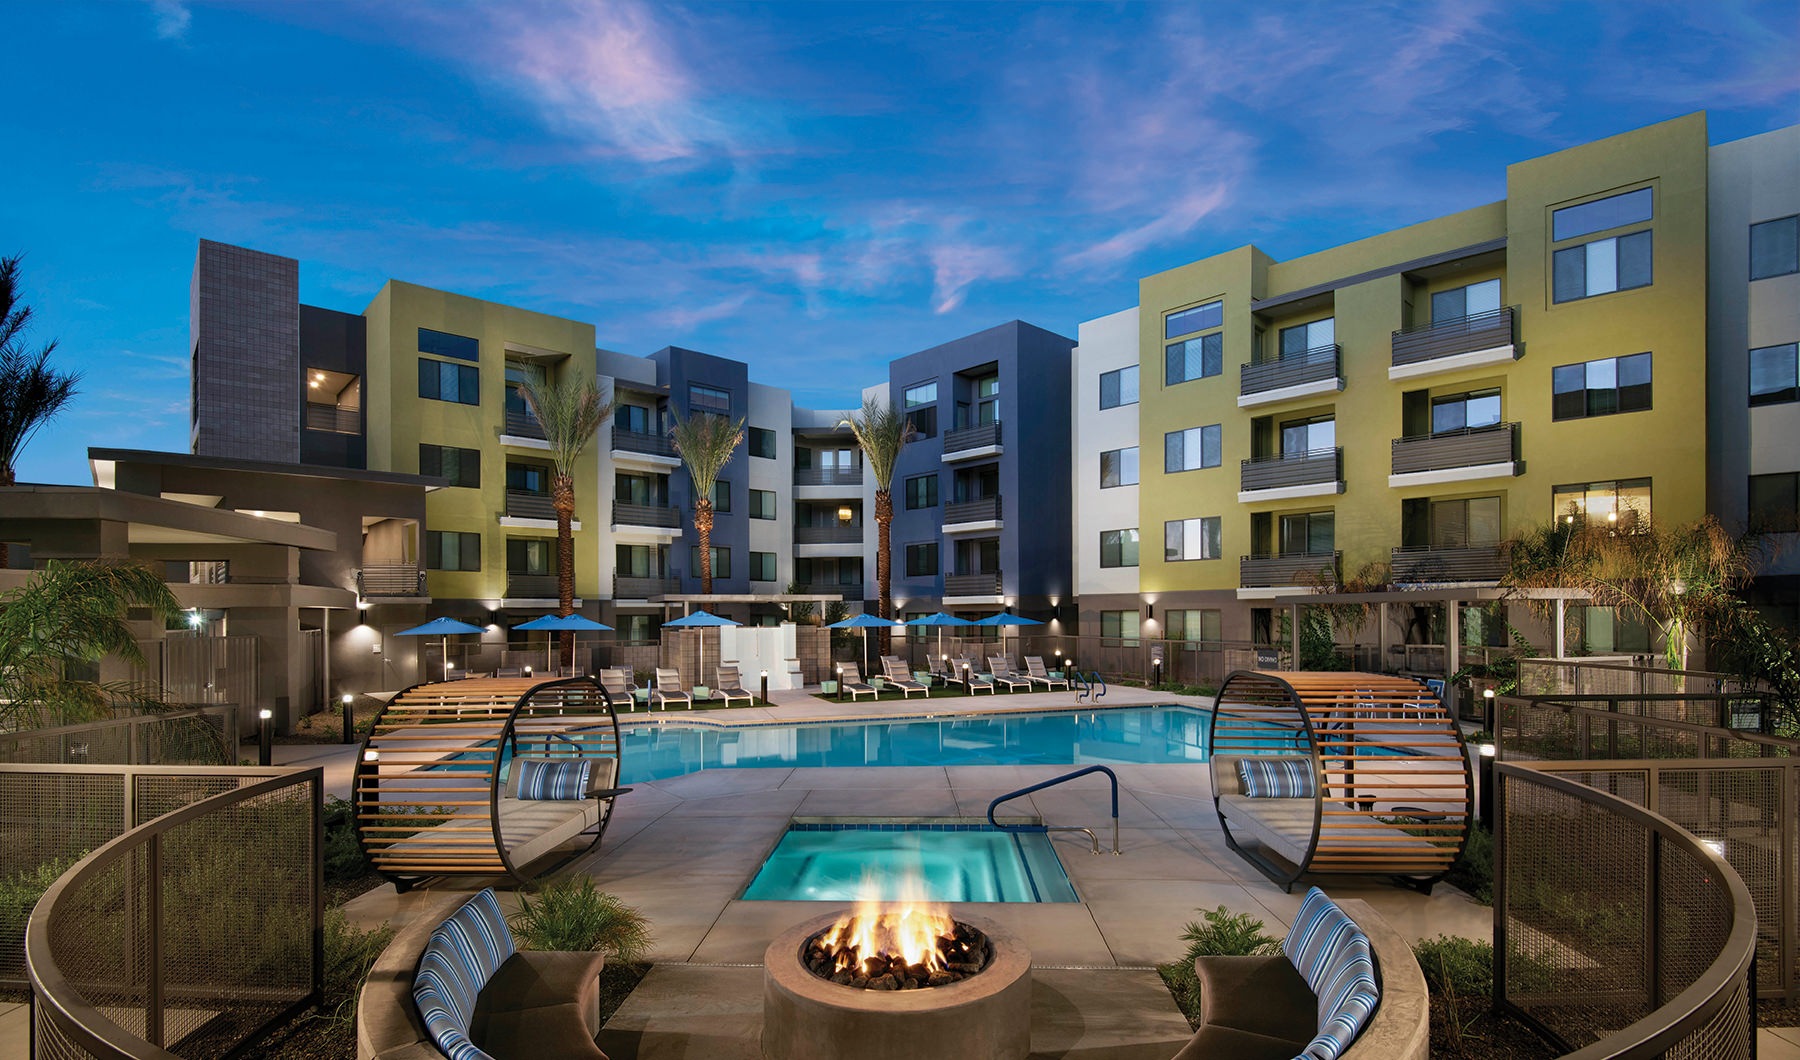 Resort-style swimming pool and hot tub surrounded by four story apartments